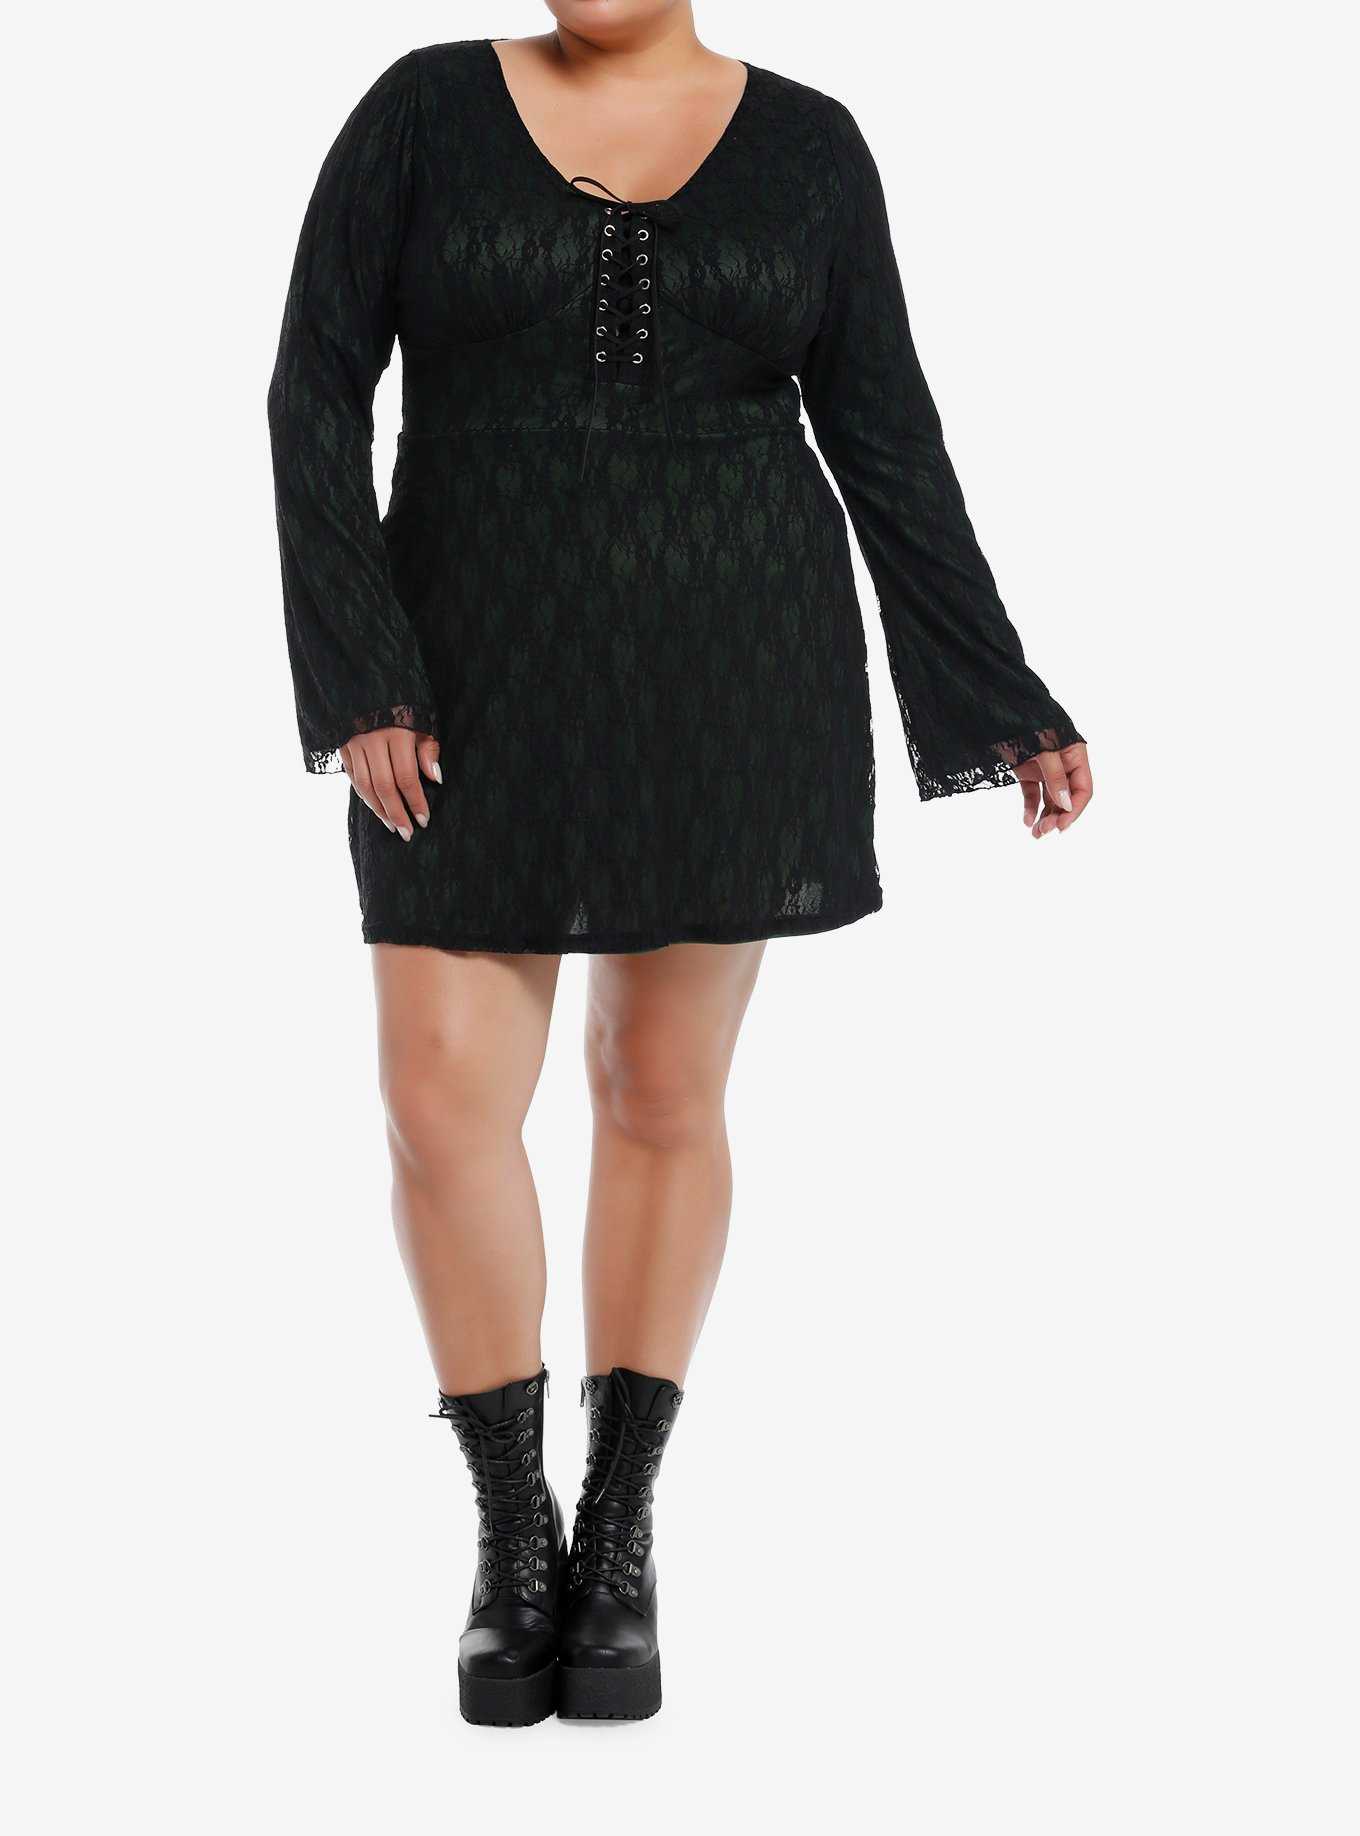 Black & Green Lace Bell Sleeve Dress Plus Size, , hi-res